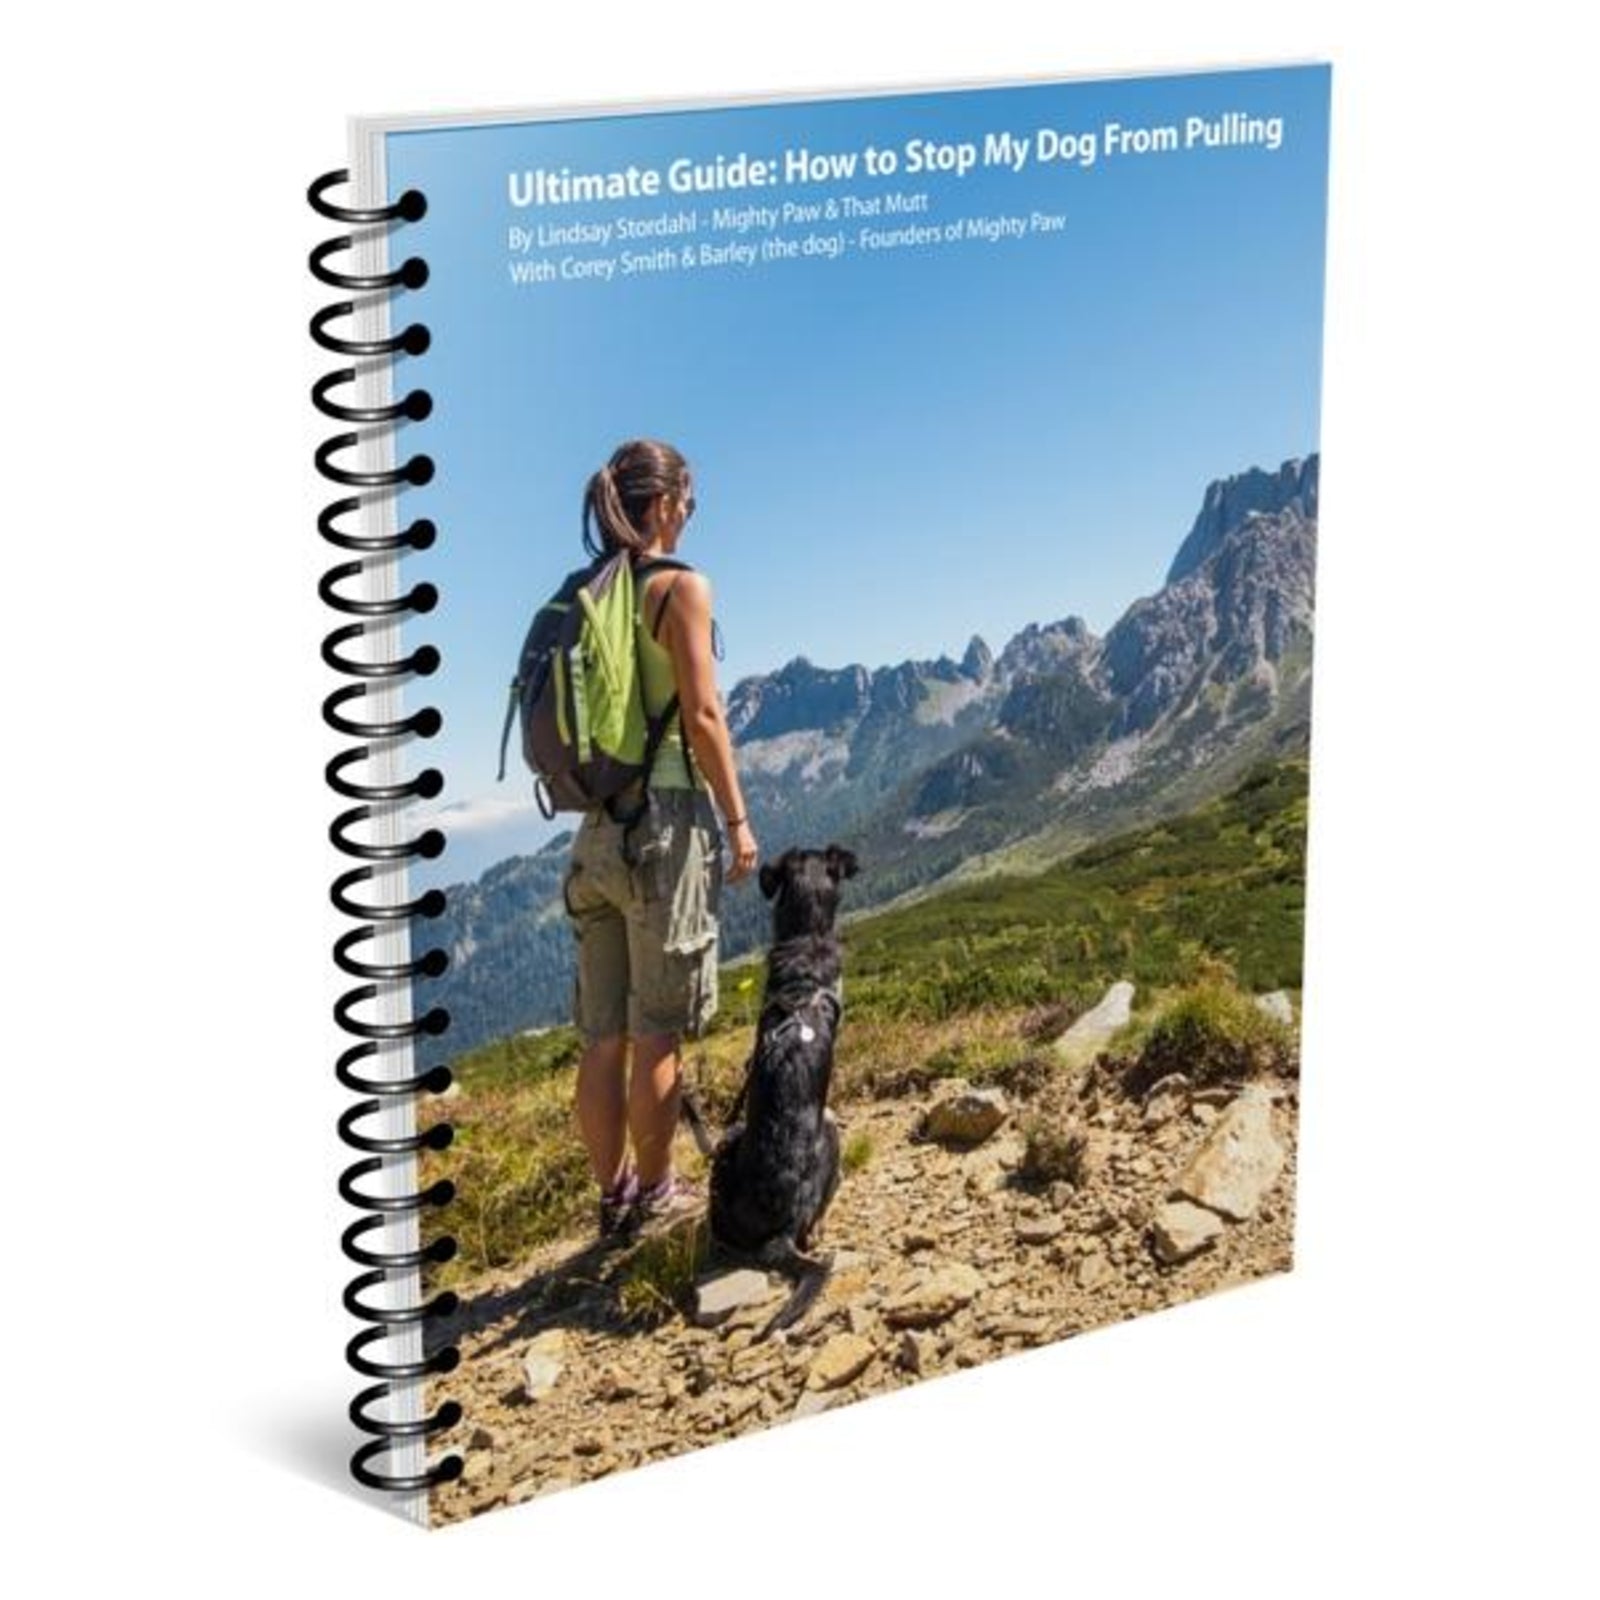 Ultimate Guide to Stopping Your Dog From Pulling (Ebook)